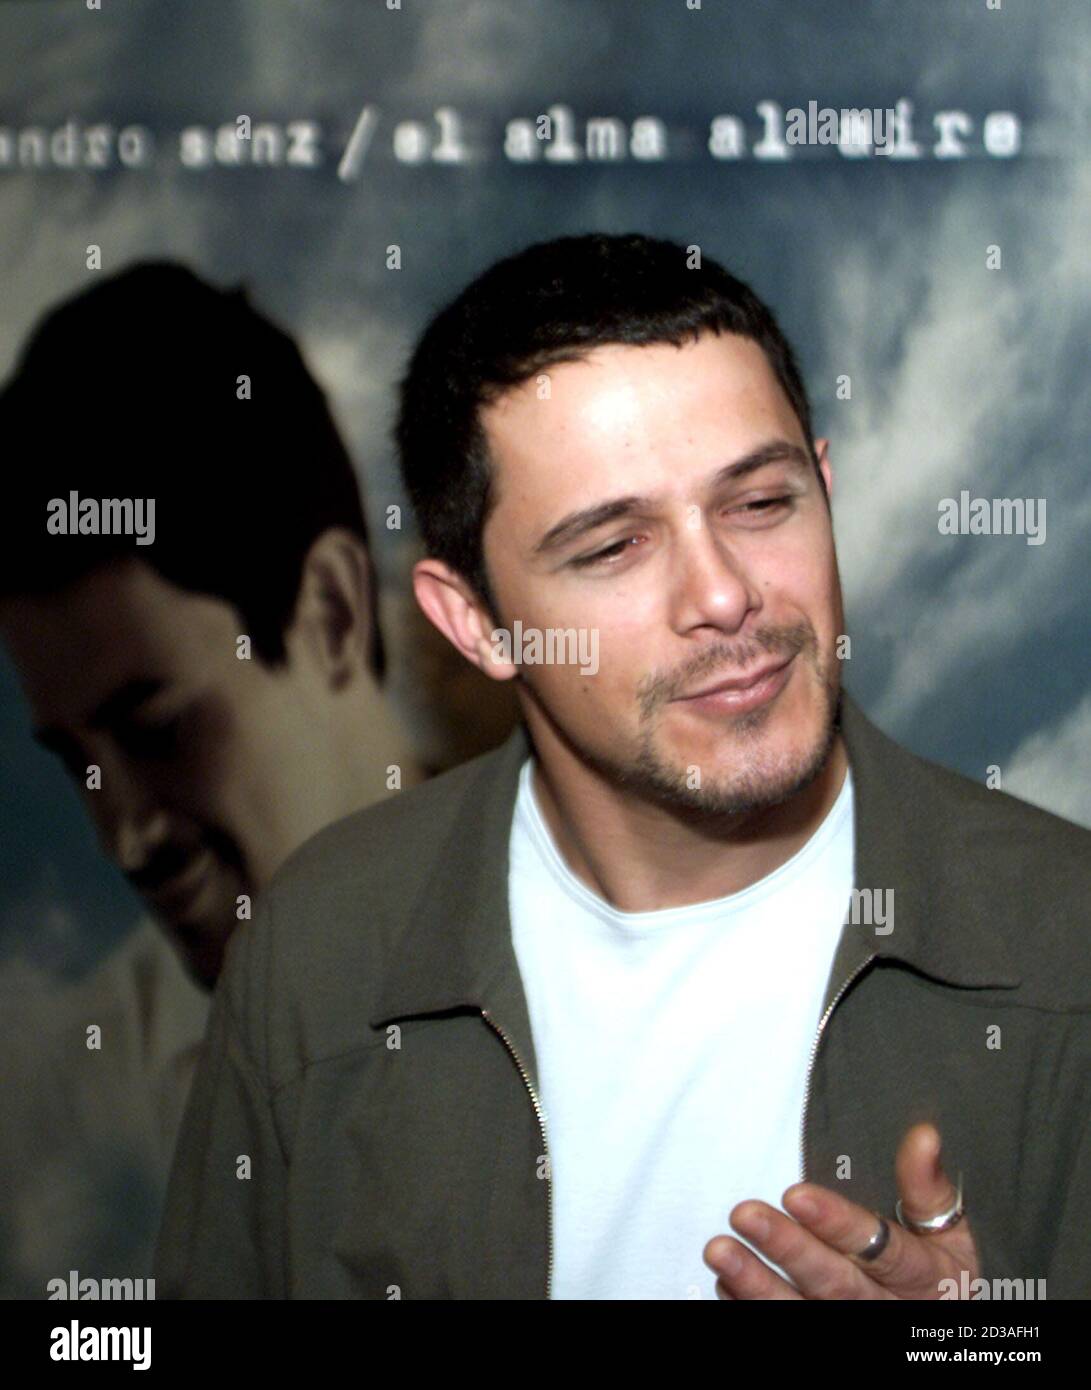 Spanish Singer Alejandro Sanz Gestures During A News Conference At A Hotel In Mexico City Late